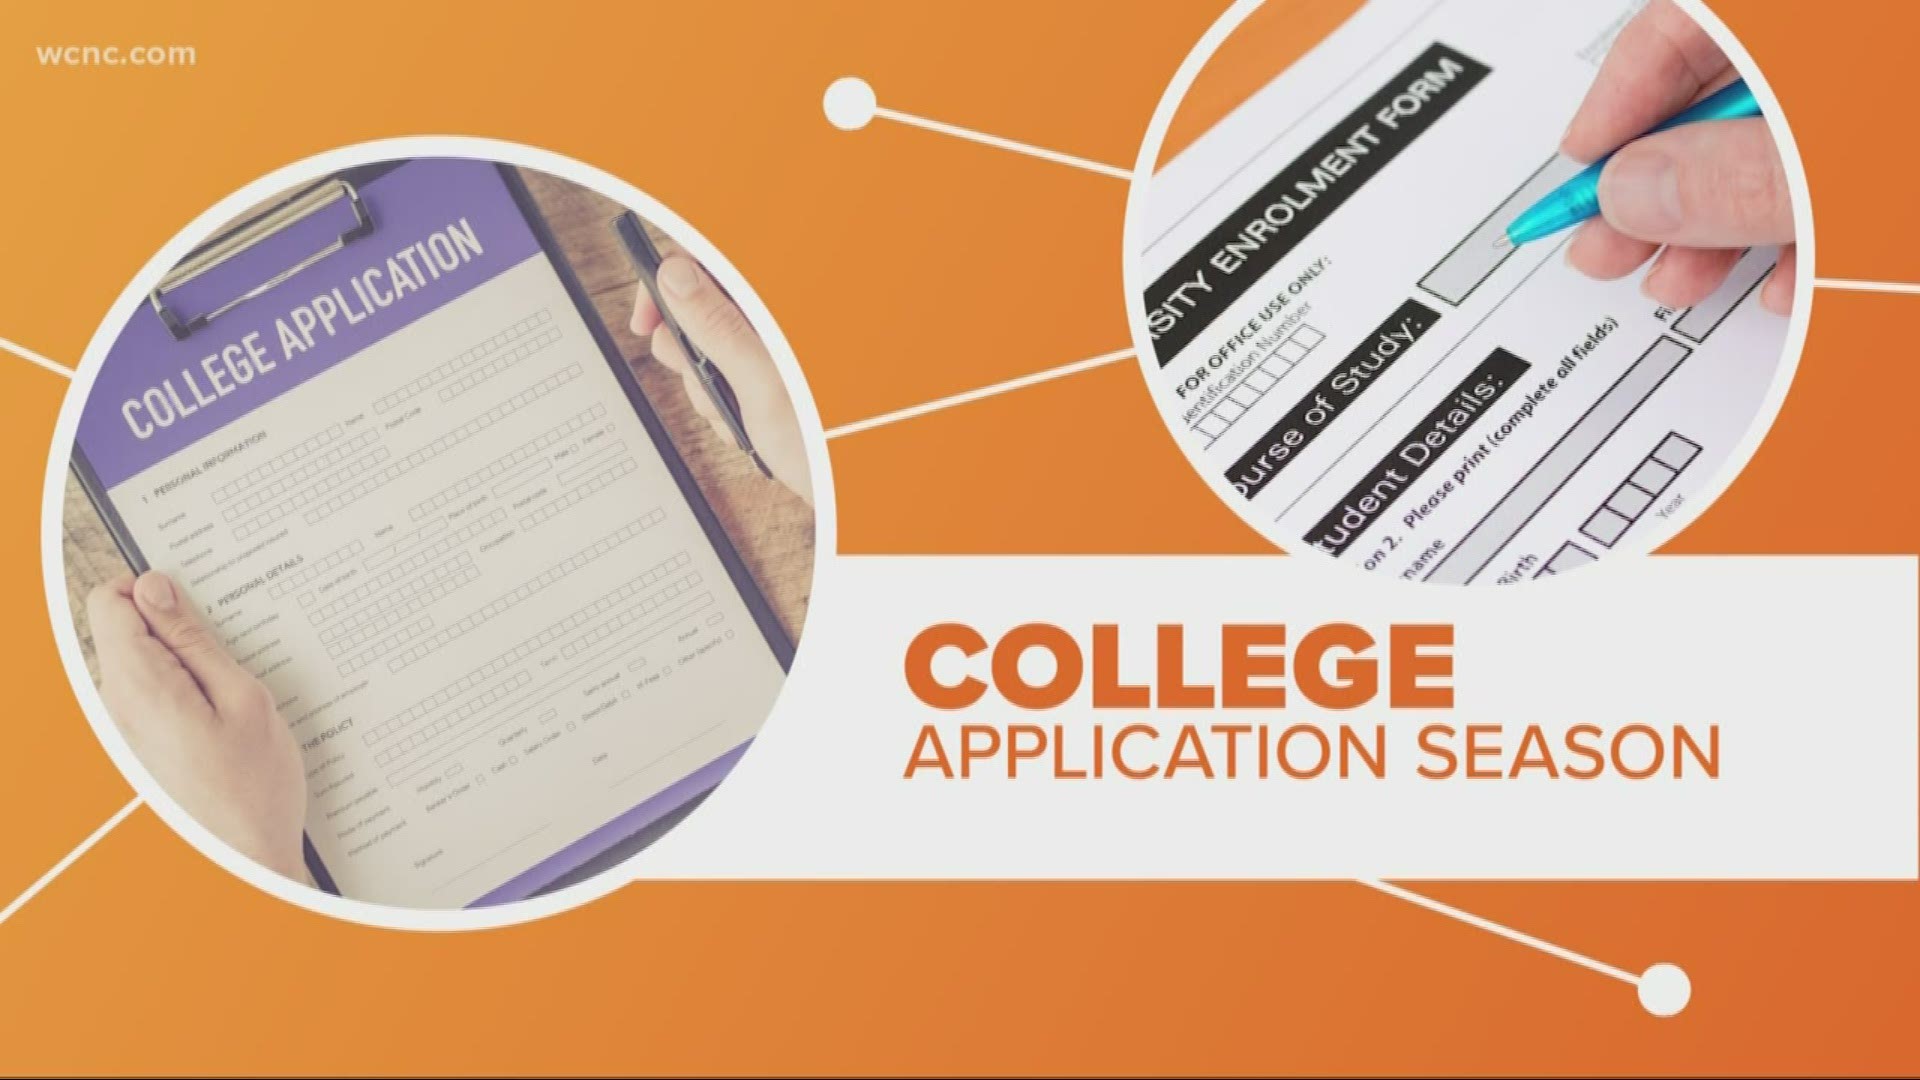 As we start a new year, it's time for high school seniors to figure out their futures. But some are just trying to figure out college applications.